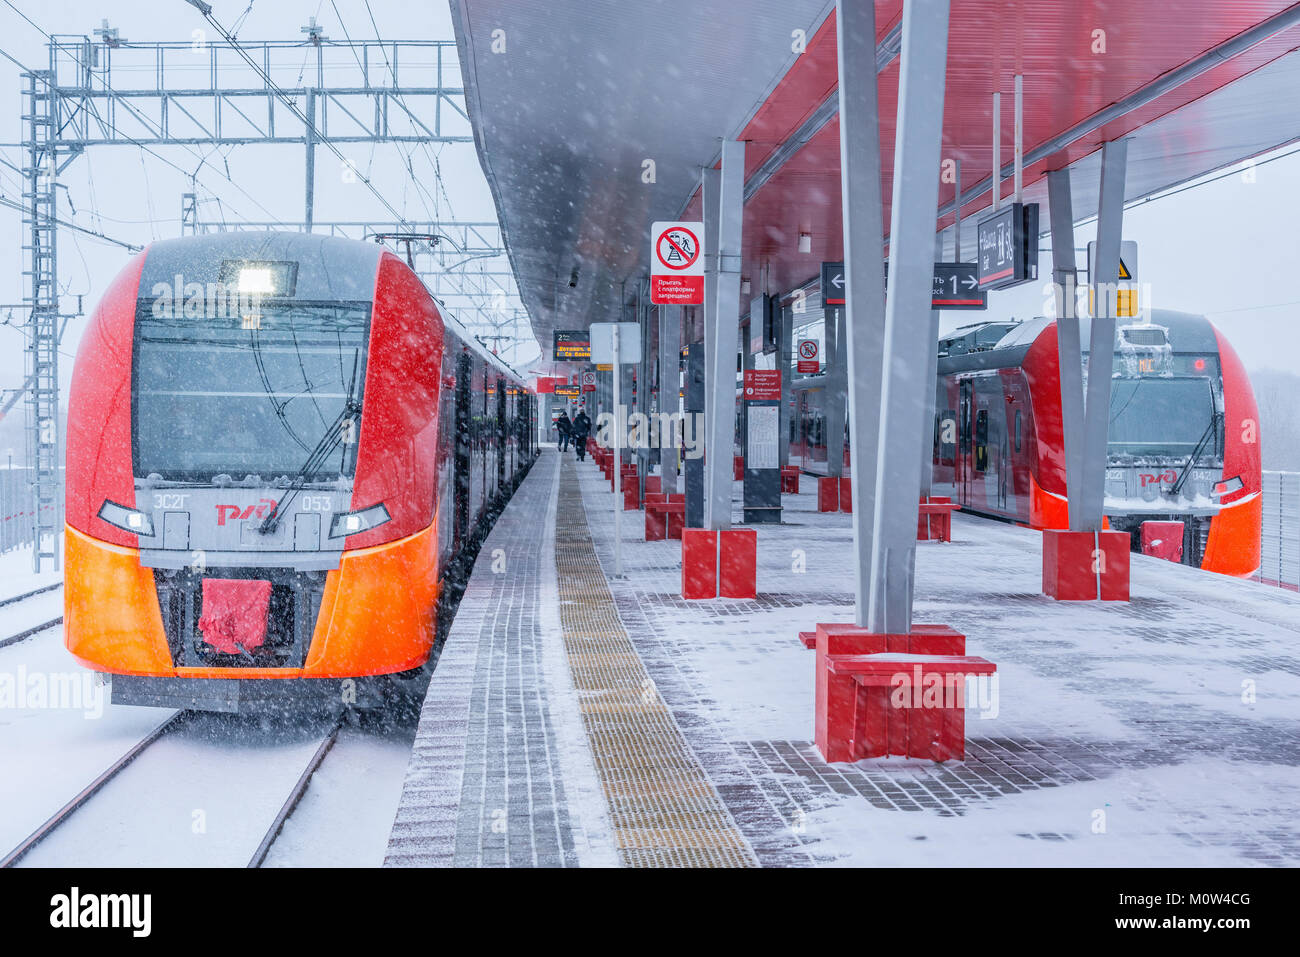 Highspeed trains stand by the Rostokino station platform. Stock Photo